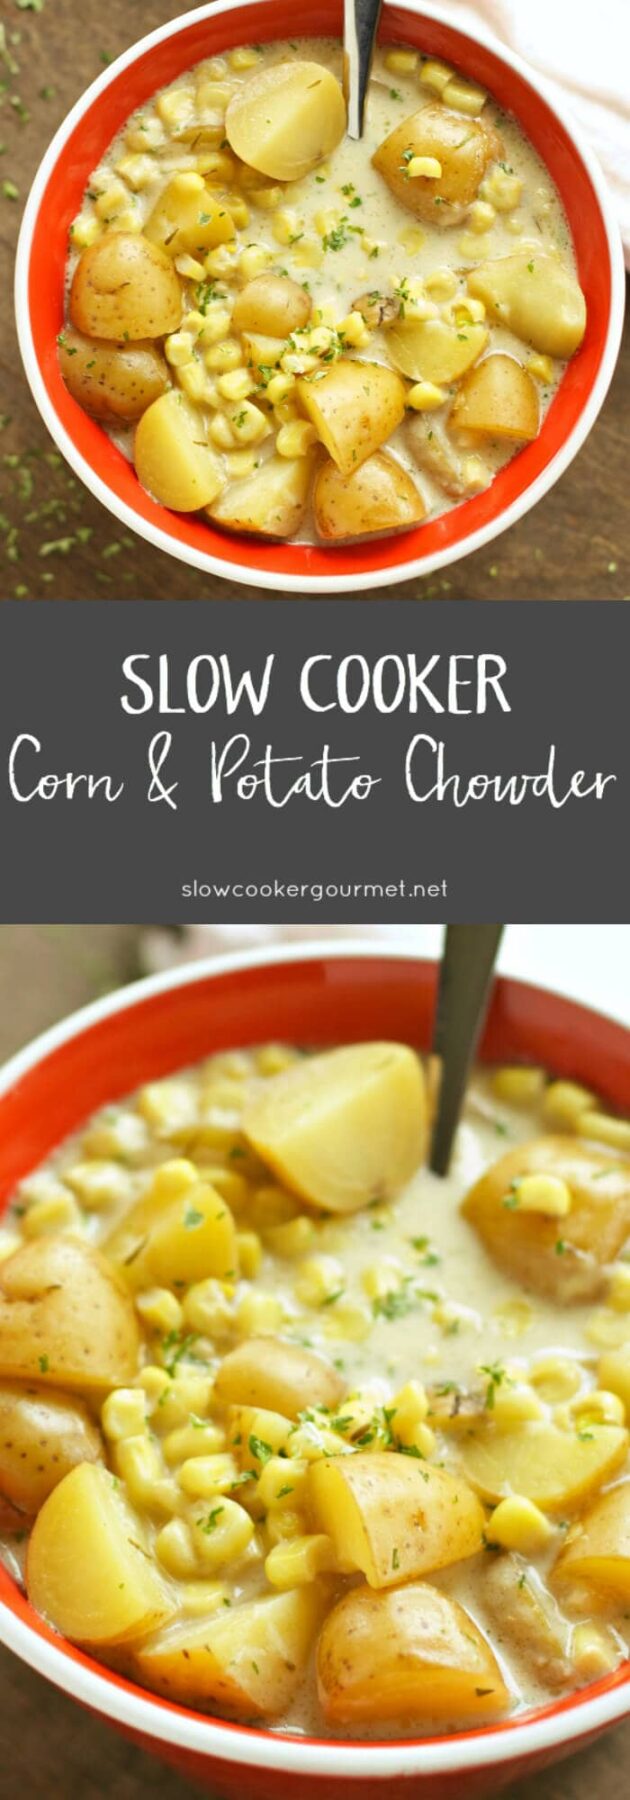 Slow Cooker Gourmet Corn and Potato Chowder